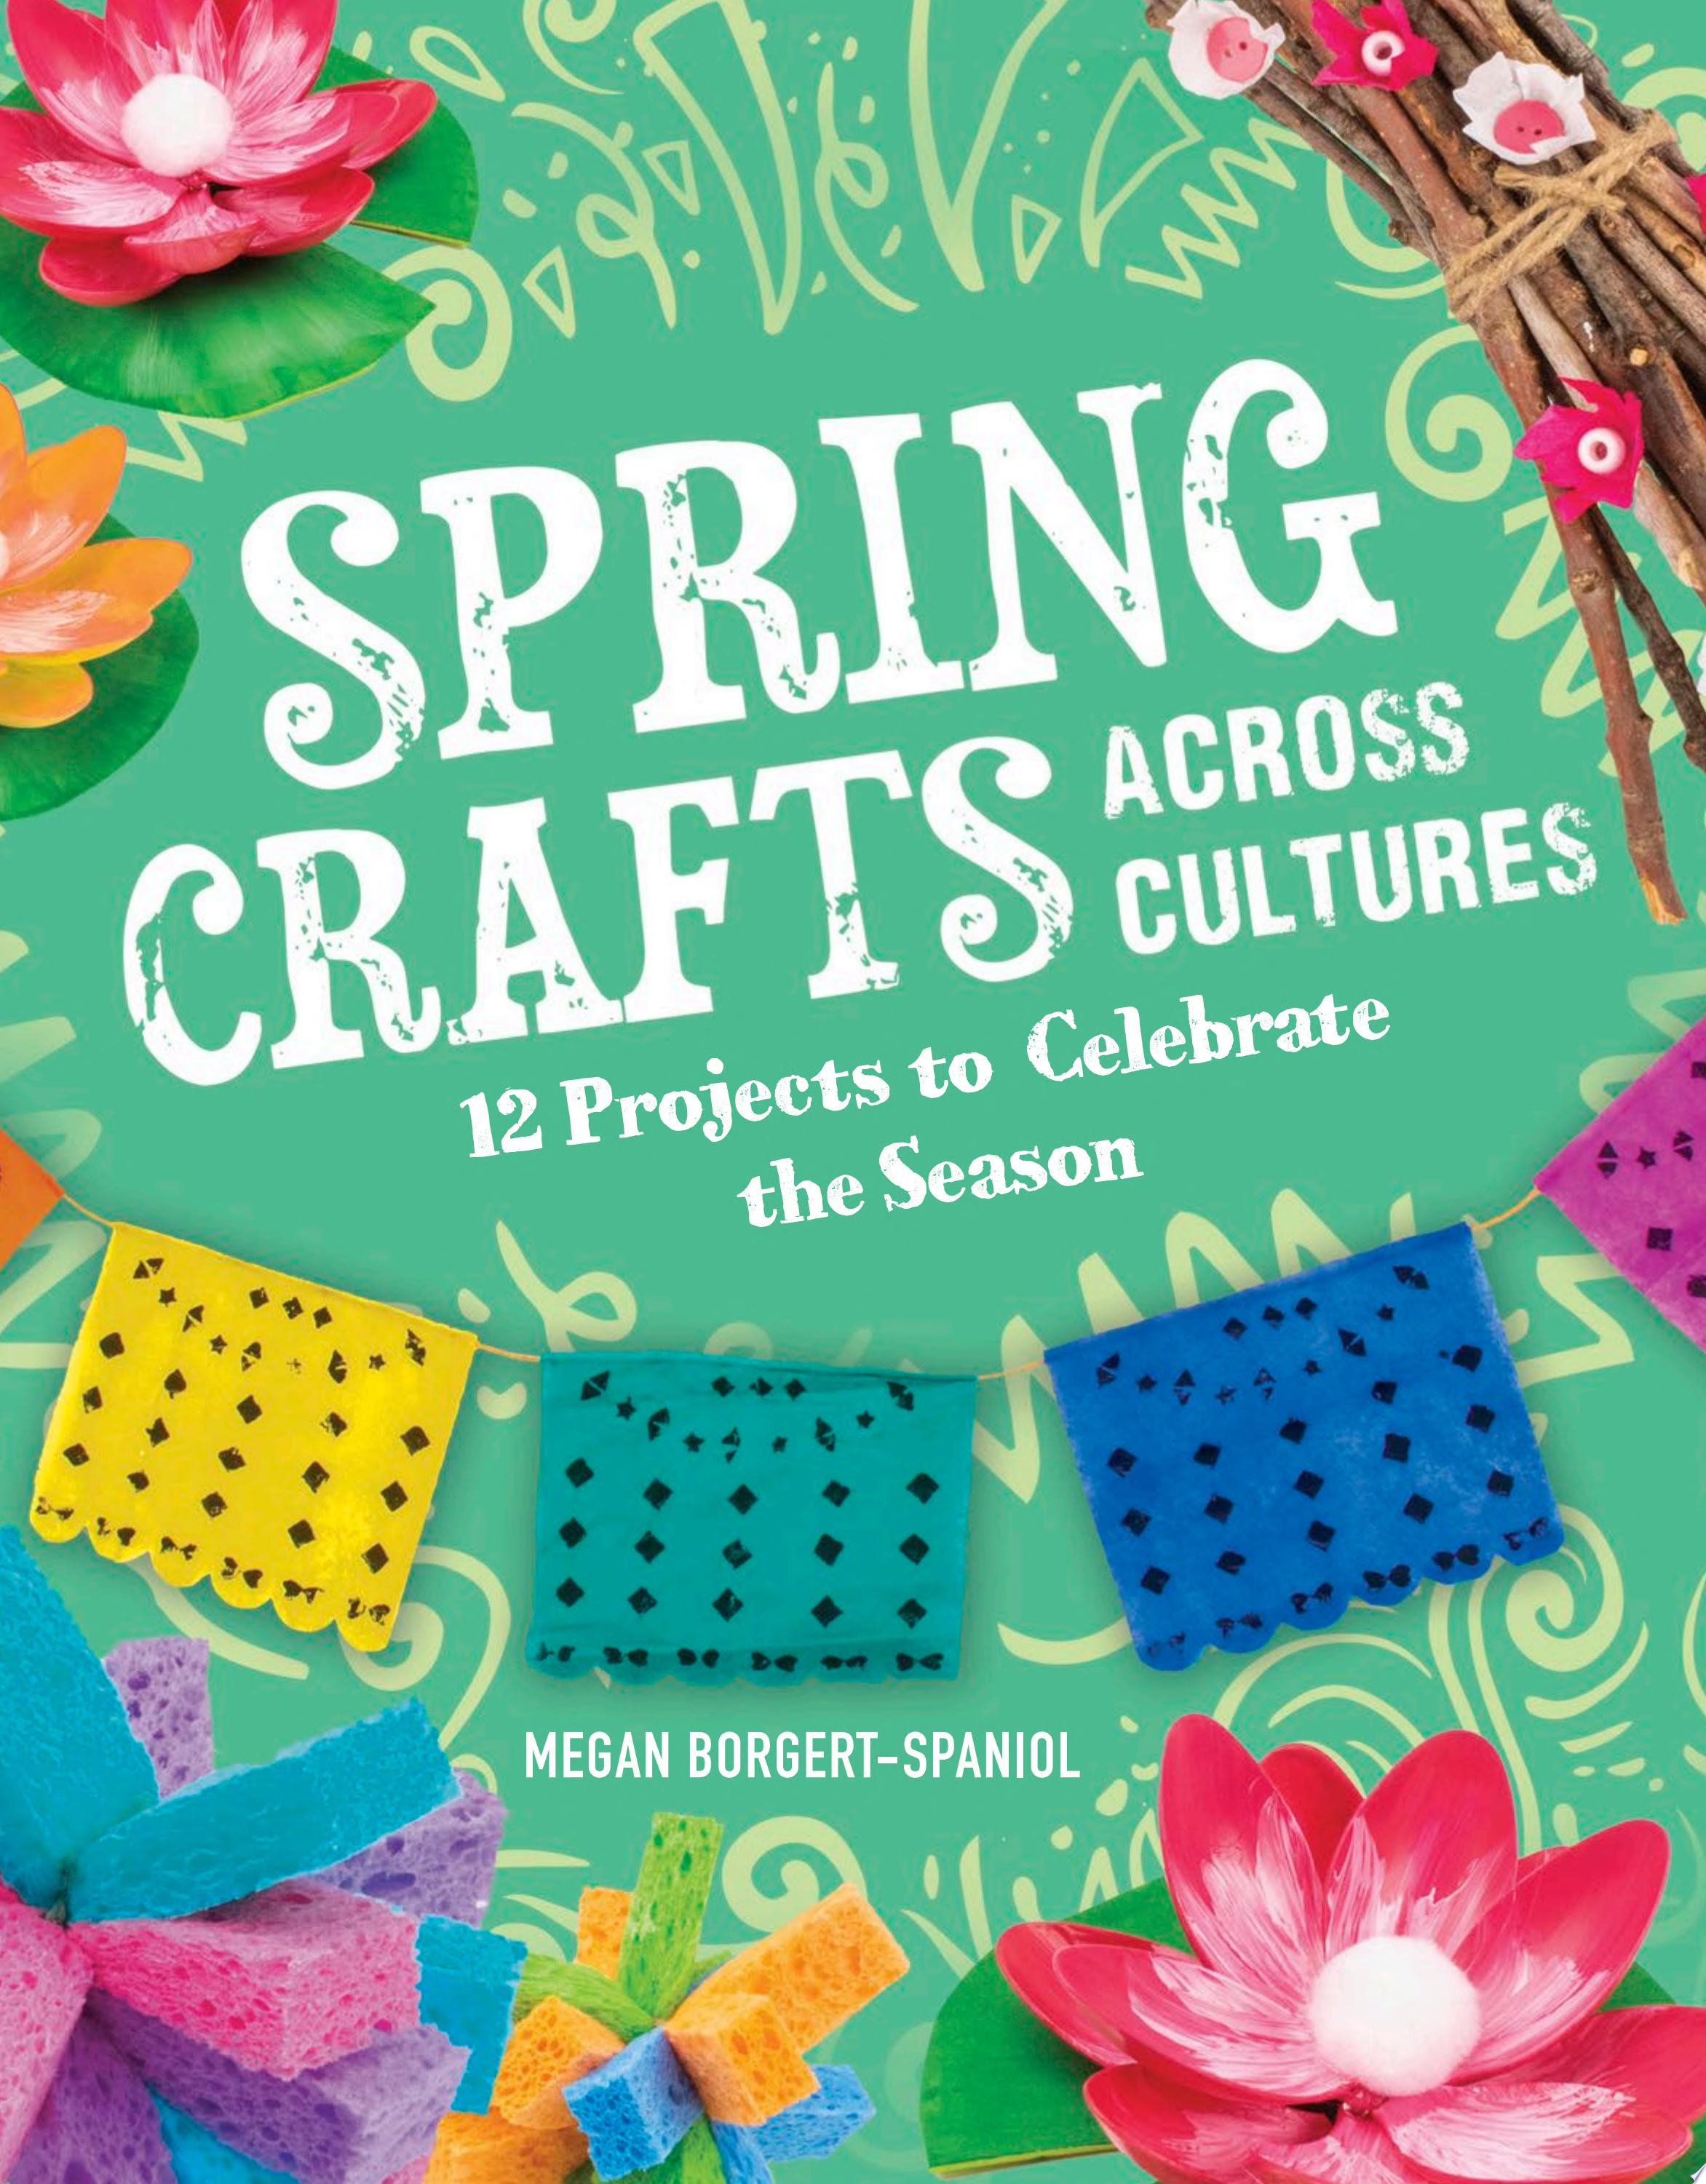 Image for "Spring Crafts Across Cultures"